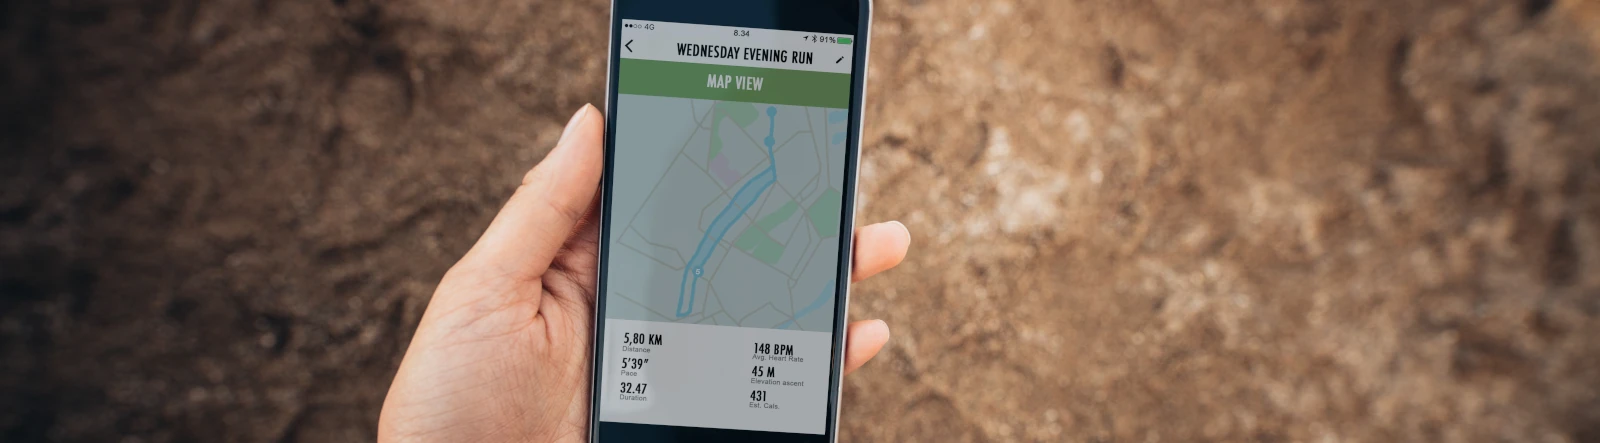 A hand holding a smartphone that is displaying a run map